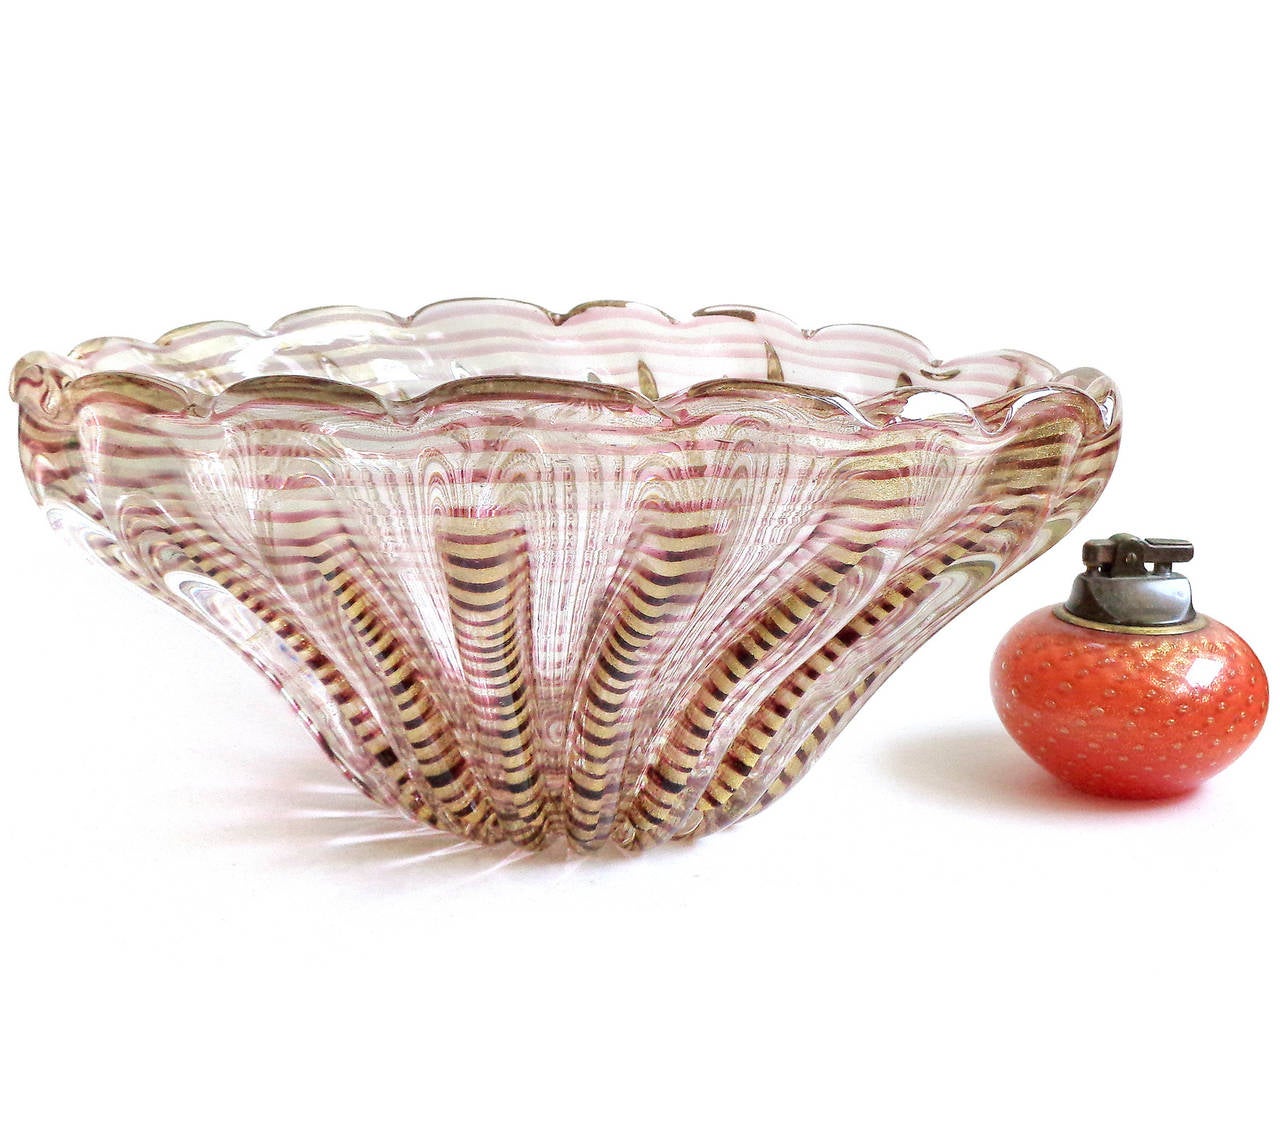 Free shipping Worldwide! See details below description.

Gorgeous, rare and very large Murano handblown purple striped and gold flecks art glass center bowl. Documented to designer Ercole Barovier, for the Barovier e Toso company. Created in the